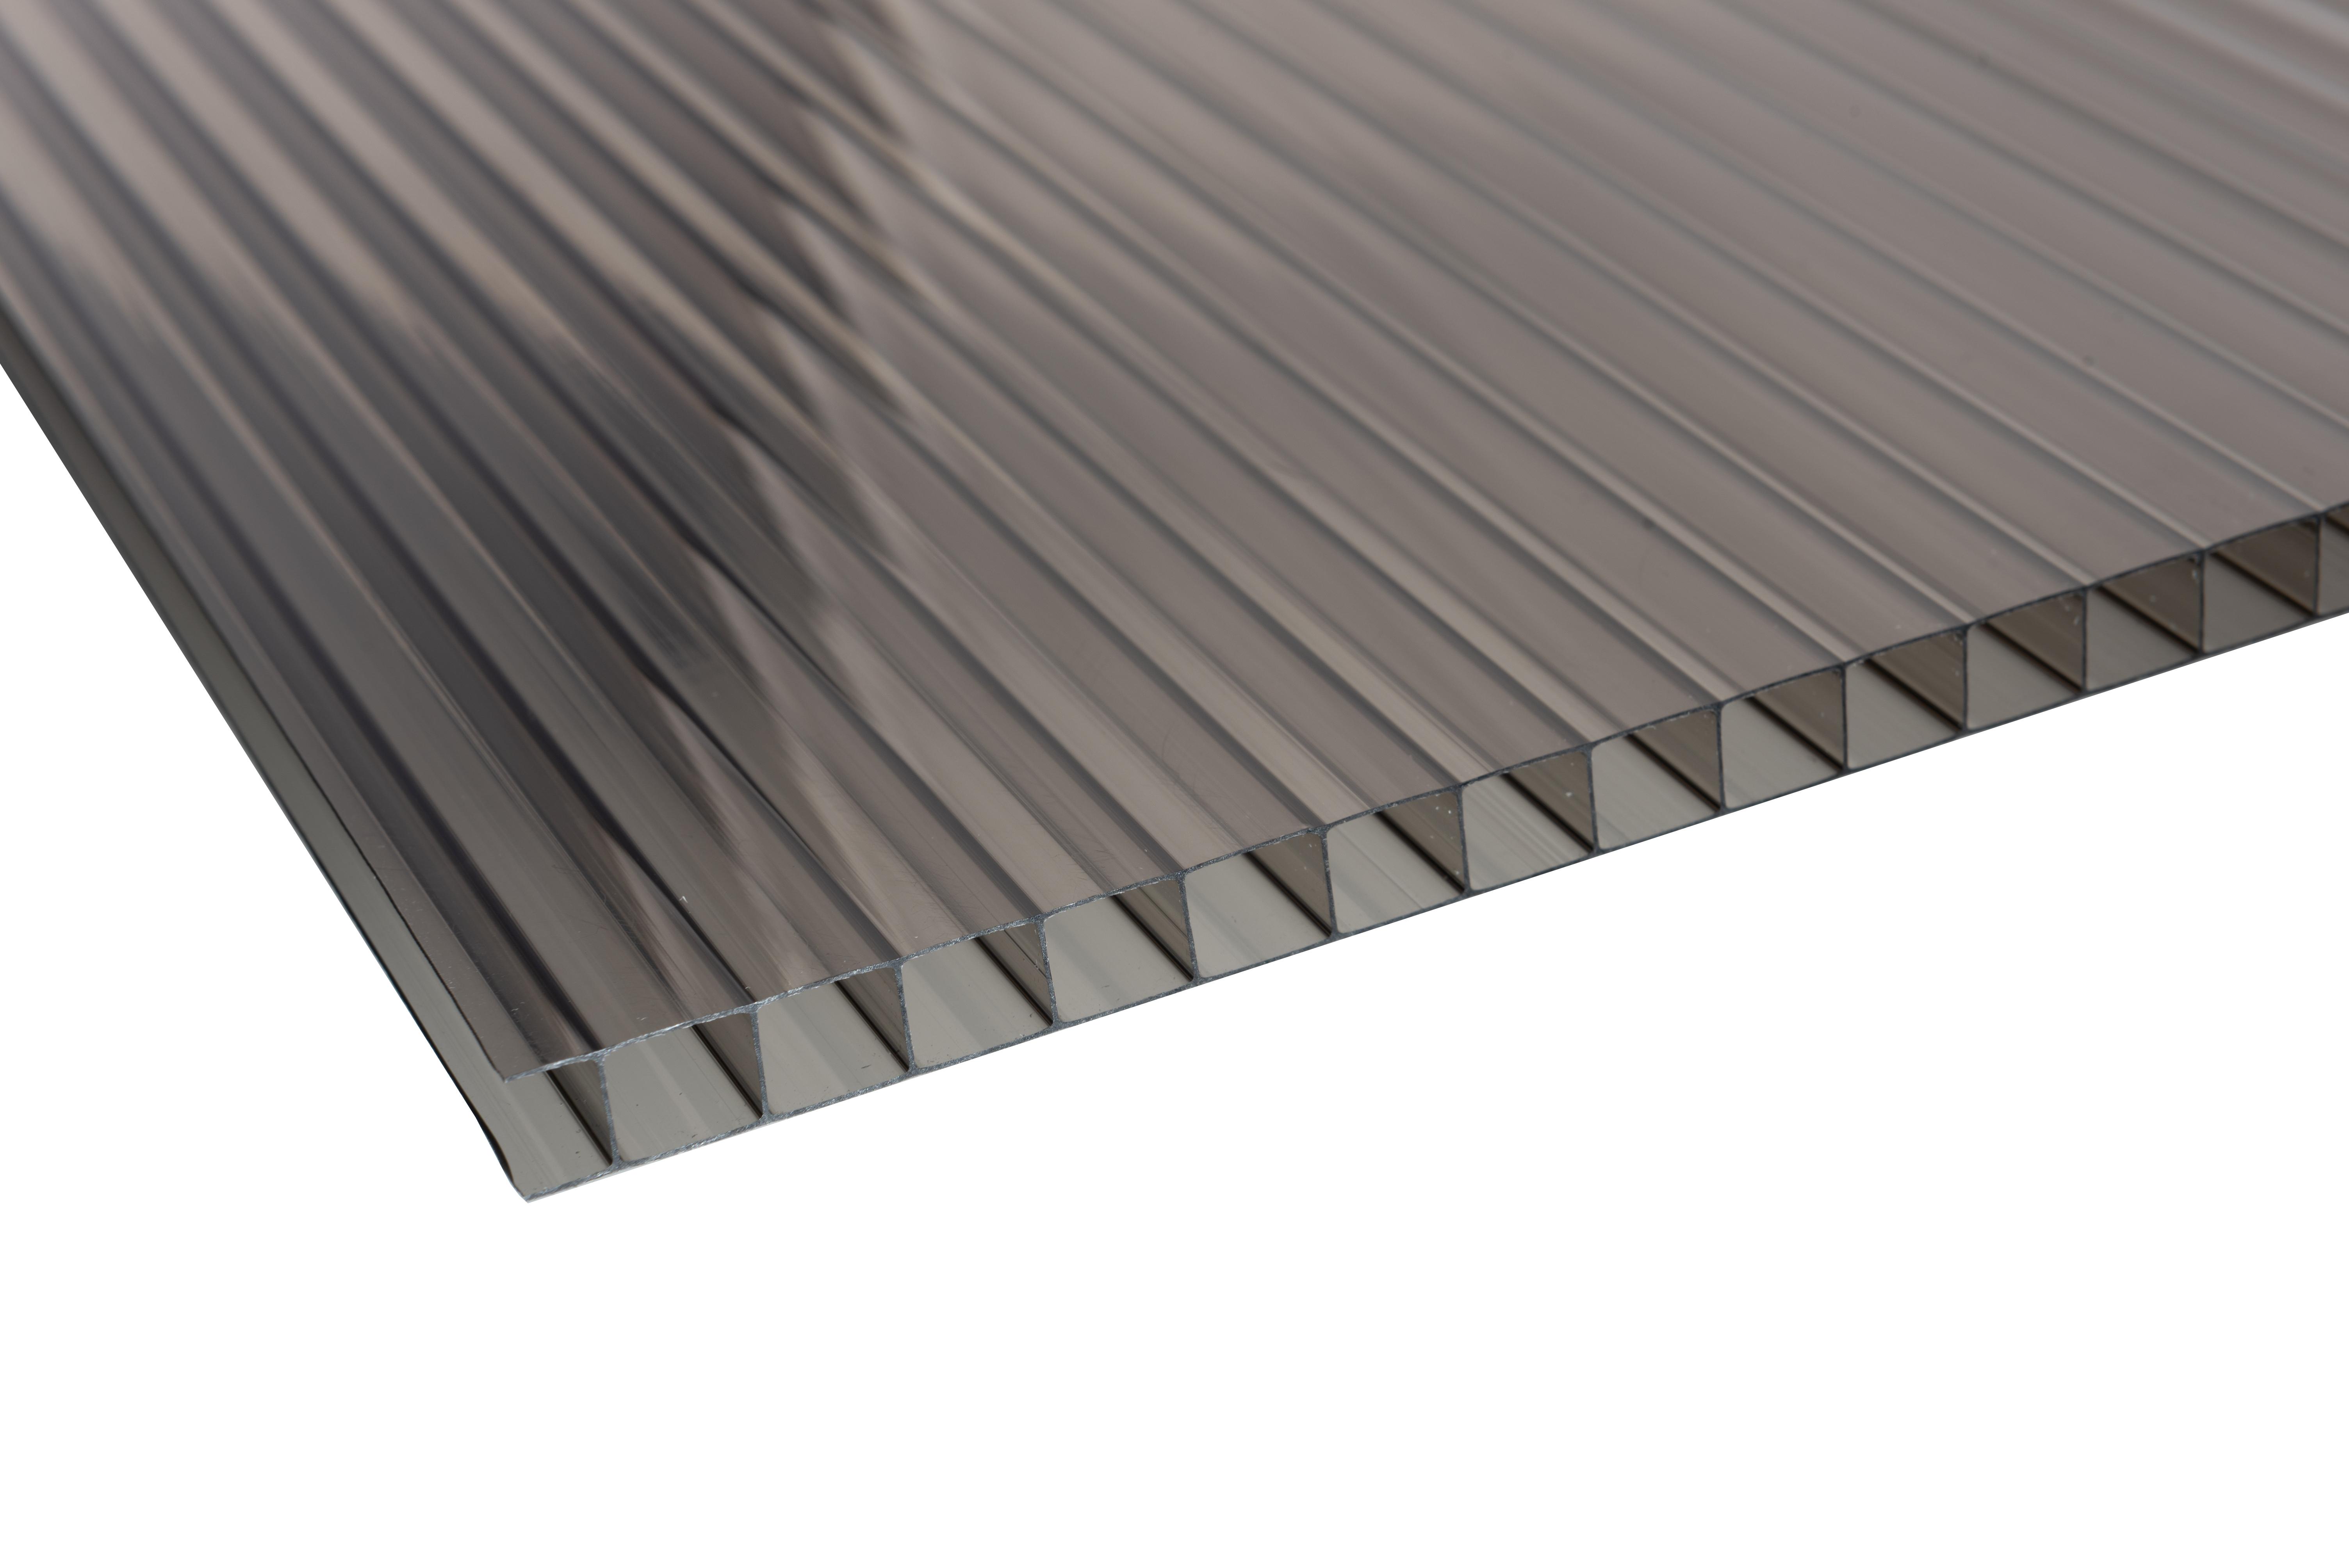 Image of 10mm Bronze Multiwall Polycarbonate Sheet - 3000 x 1050mm